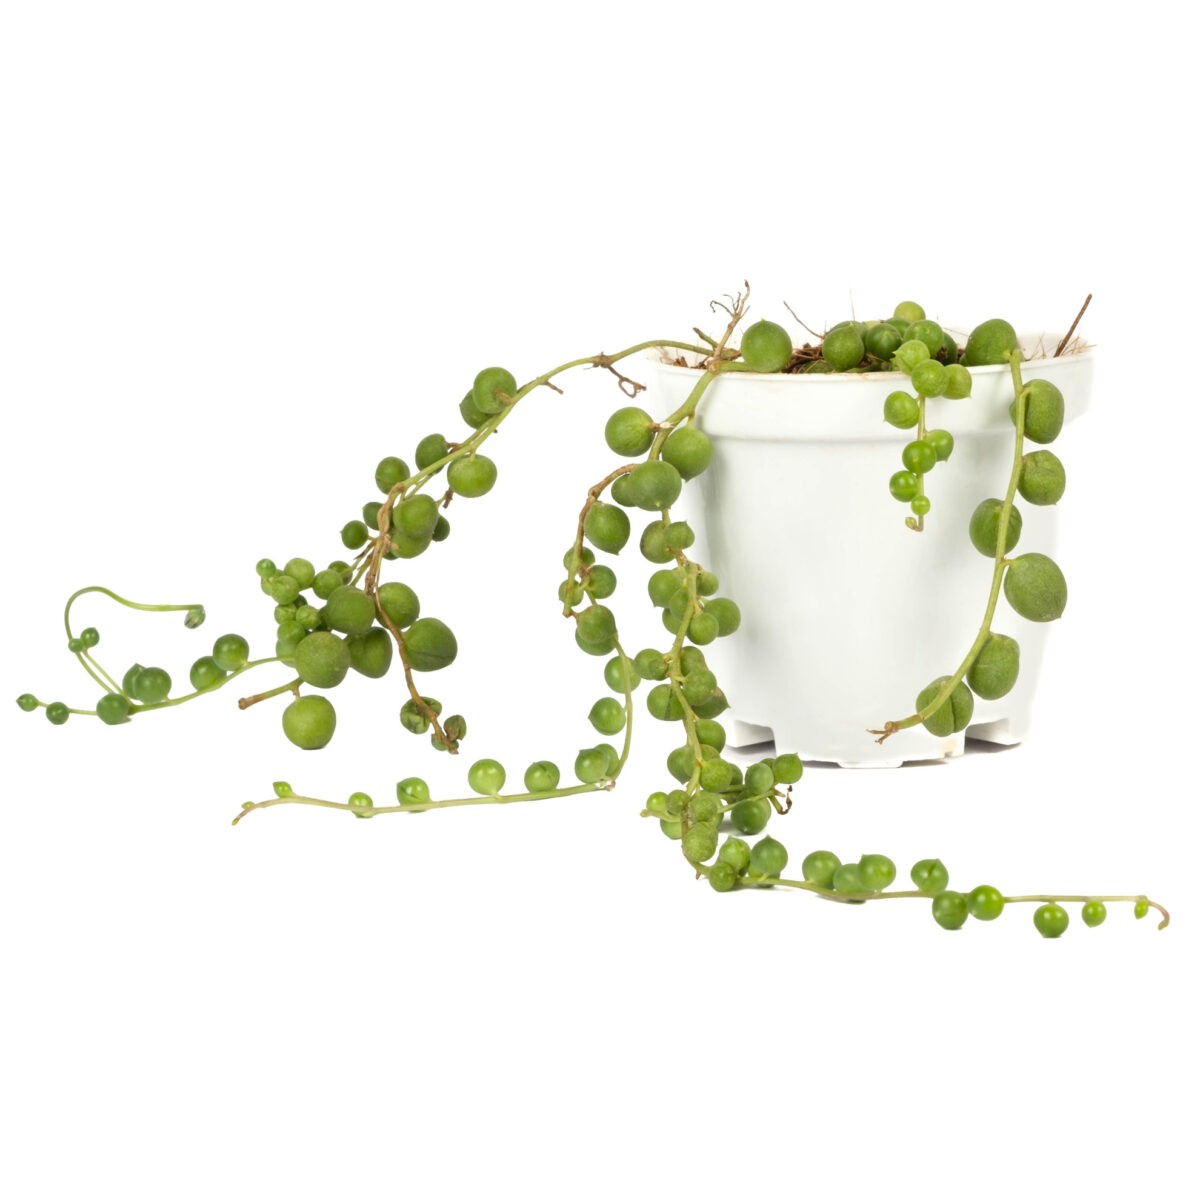 String of Pearls Plant in 3inch pot